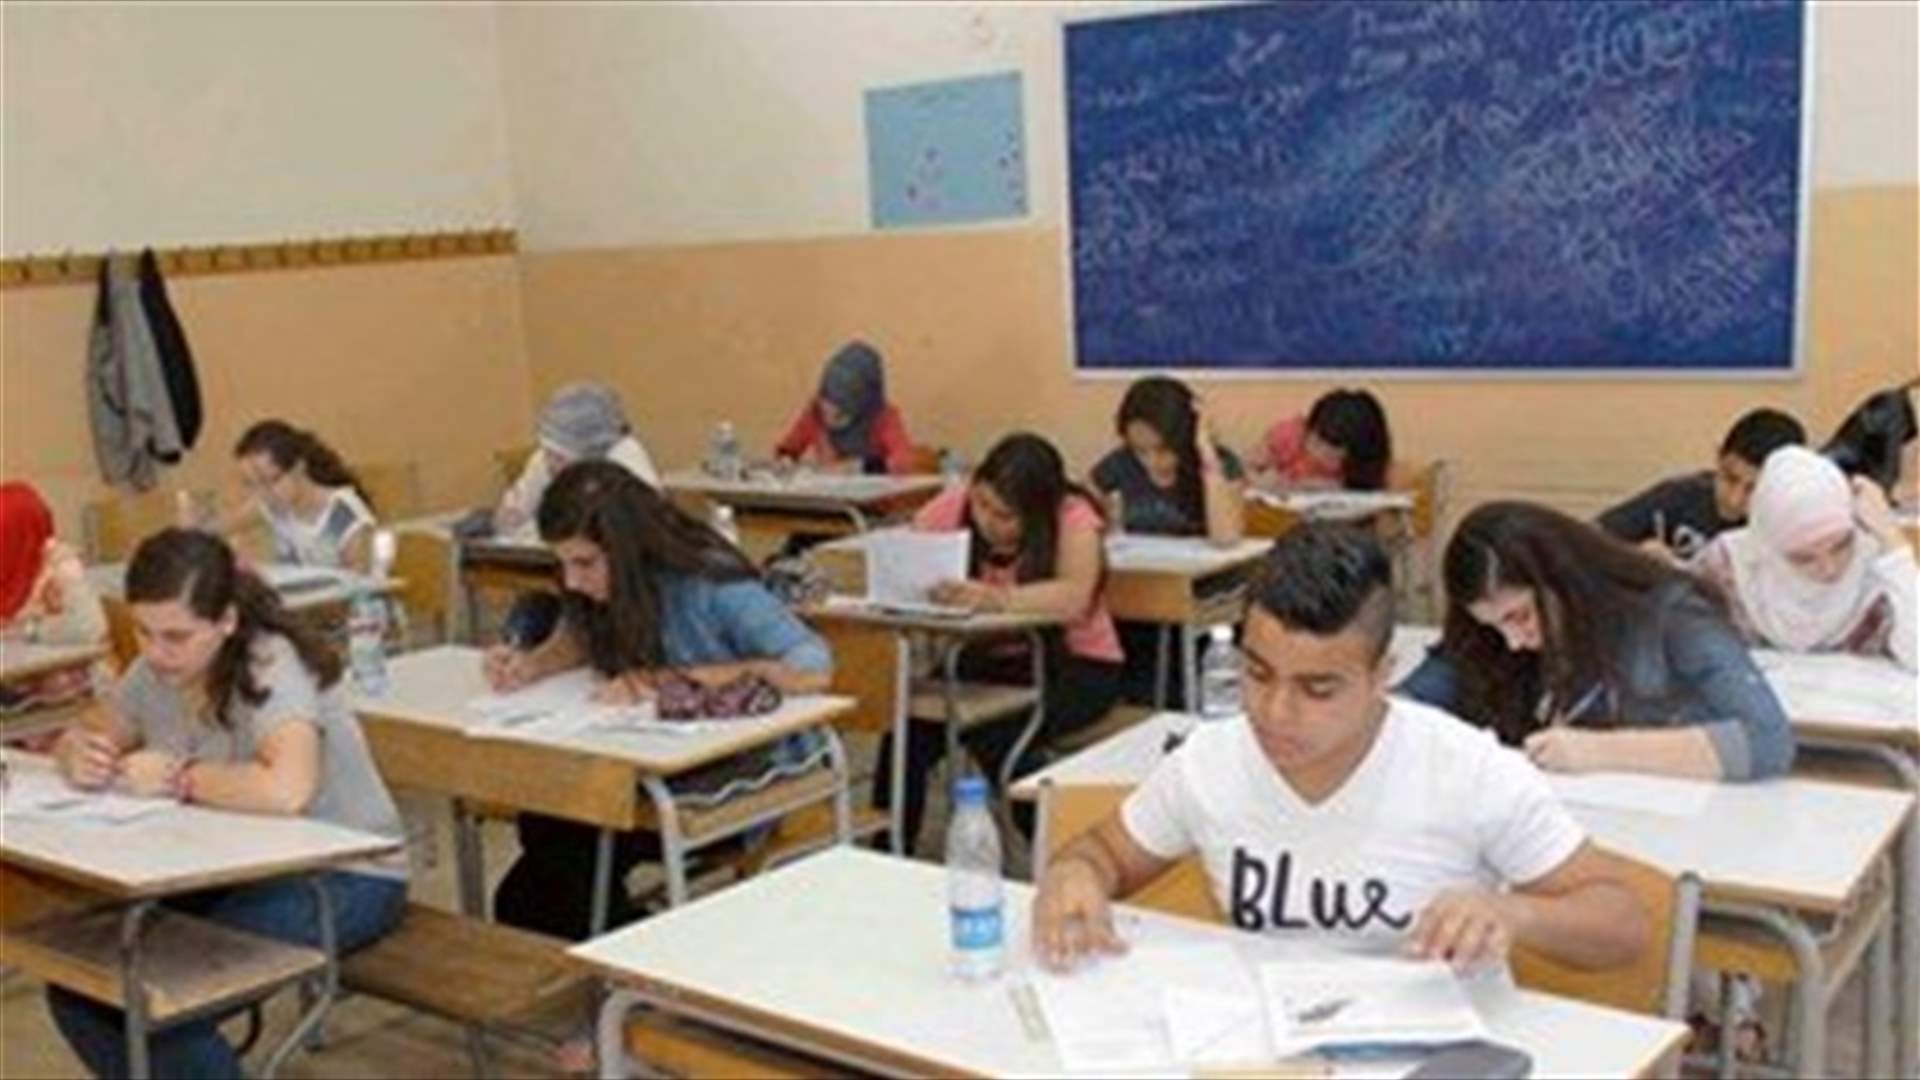 Results of Brevet official exams released